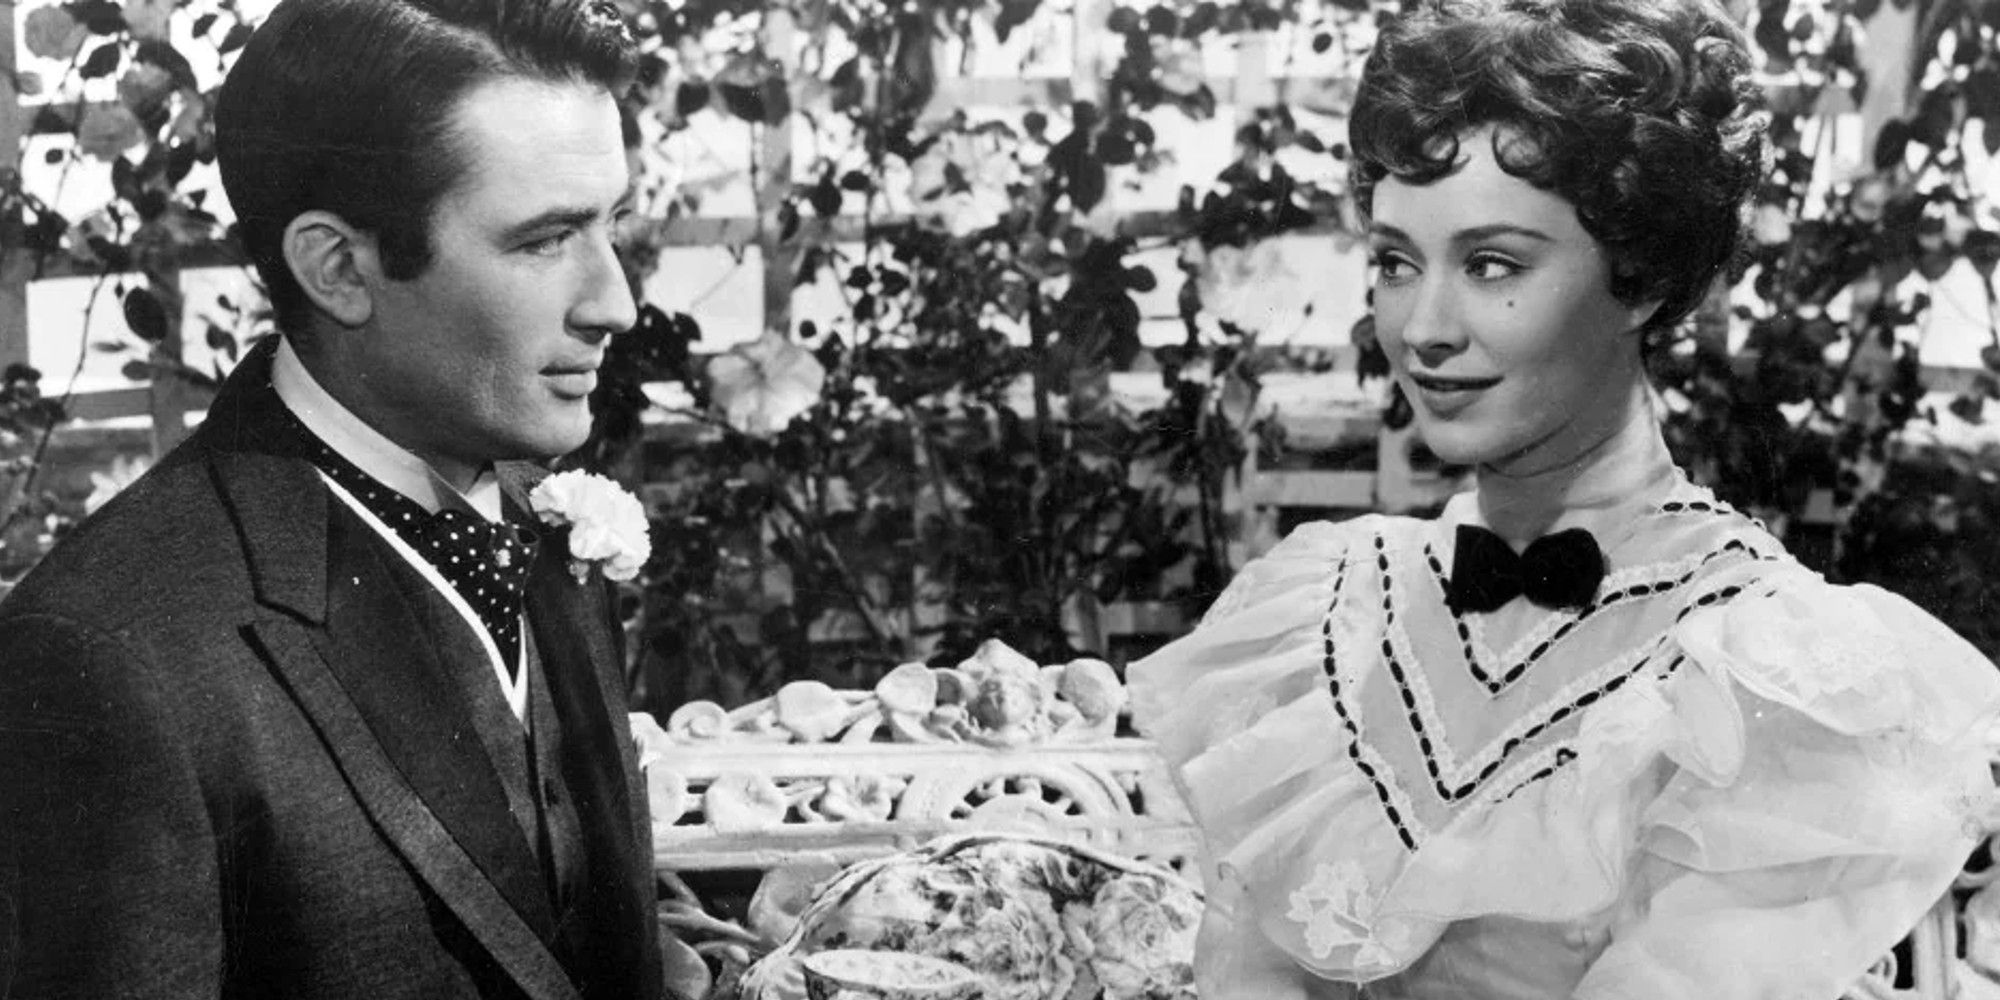 Gregory Peck and Jane Griffiths in 'Man with a Million'